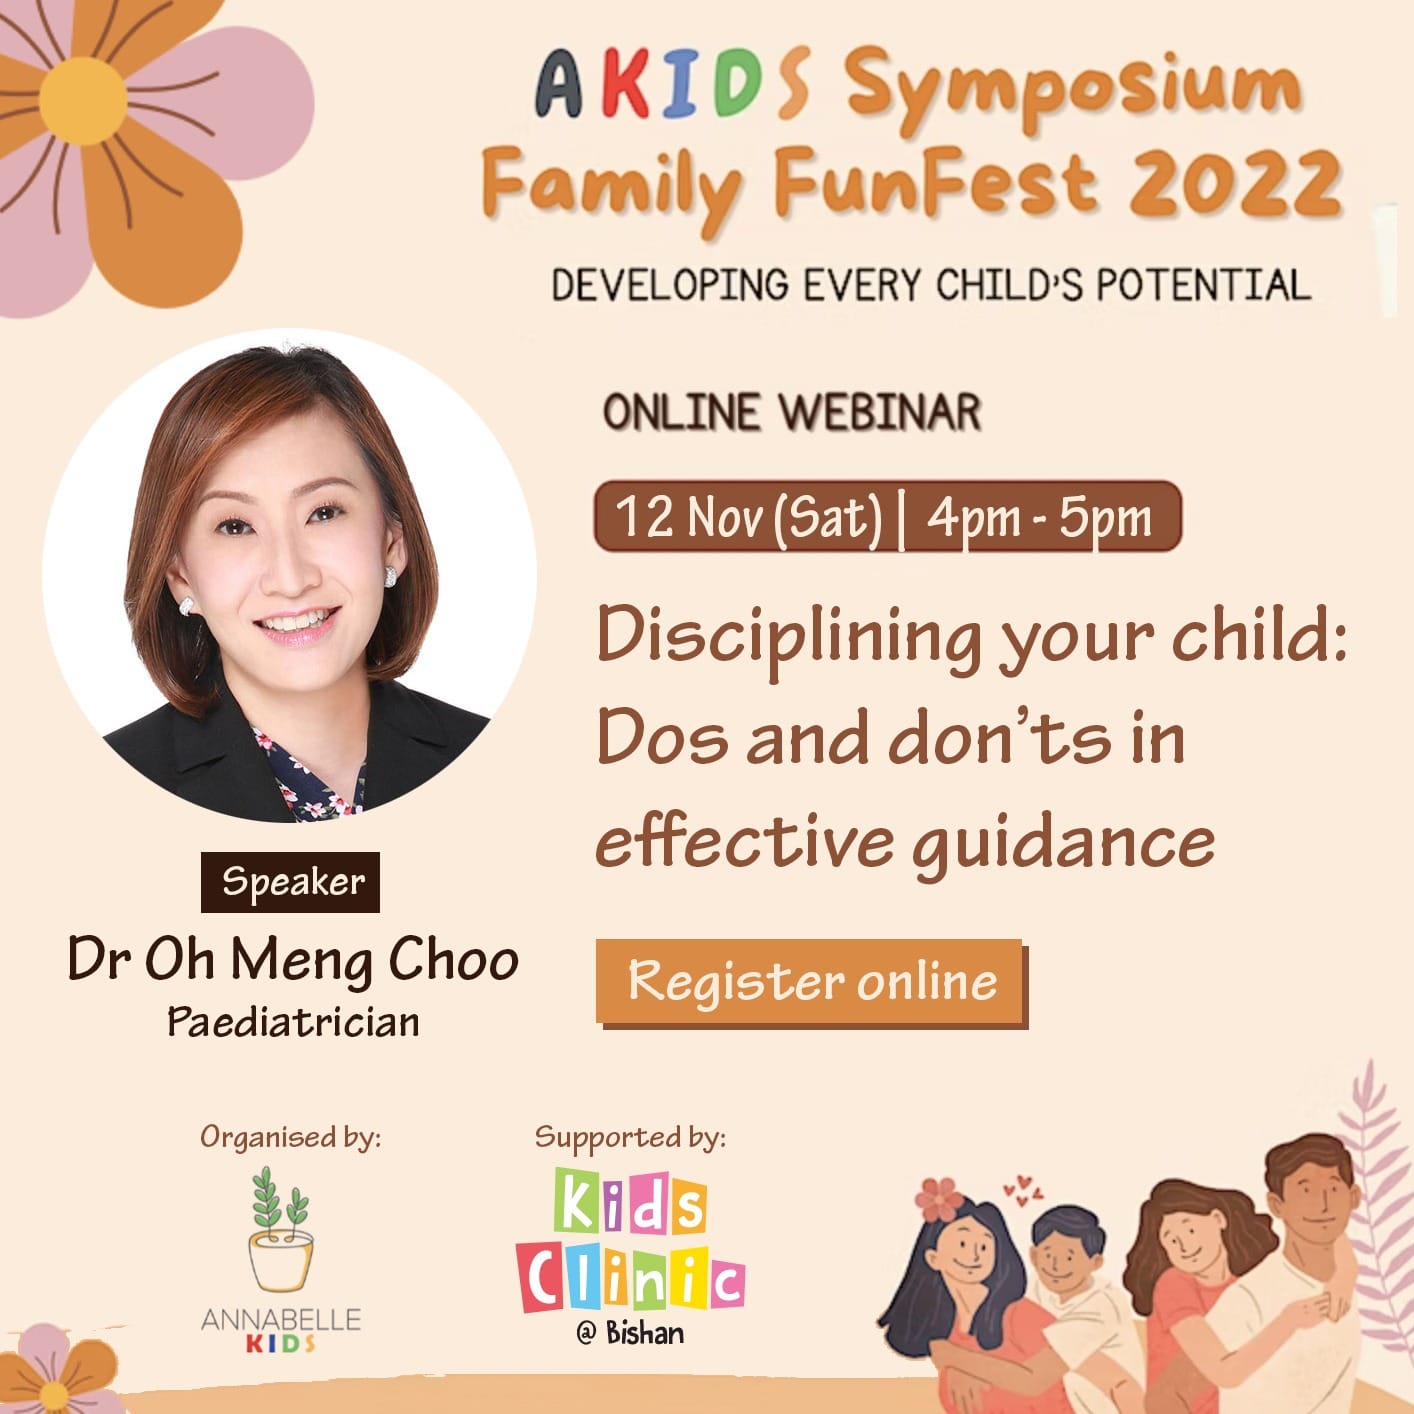 Disciplining your child: Dos and don’ts in effective guidance